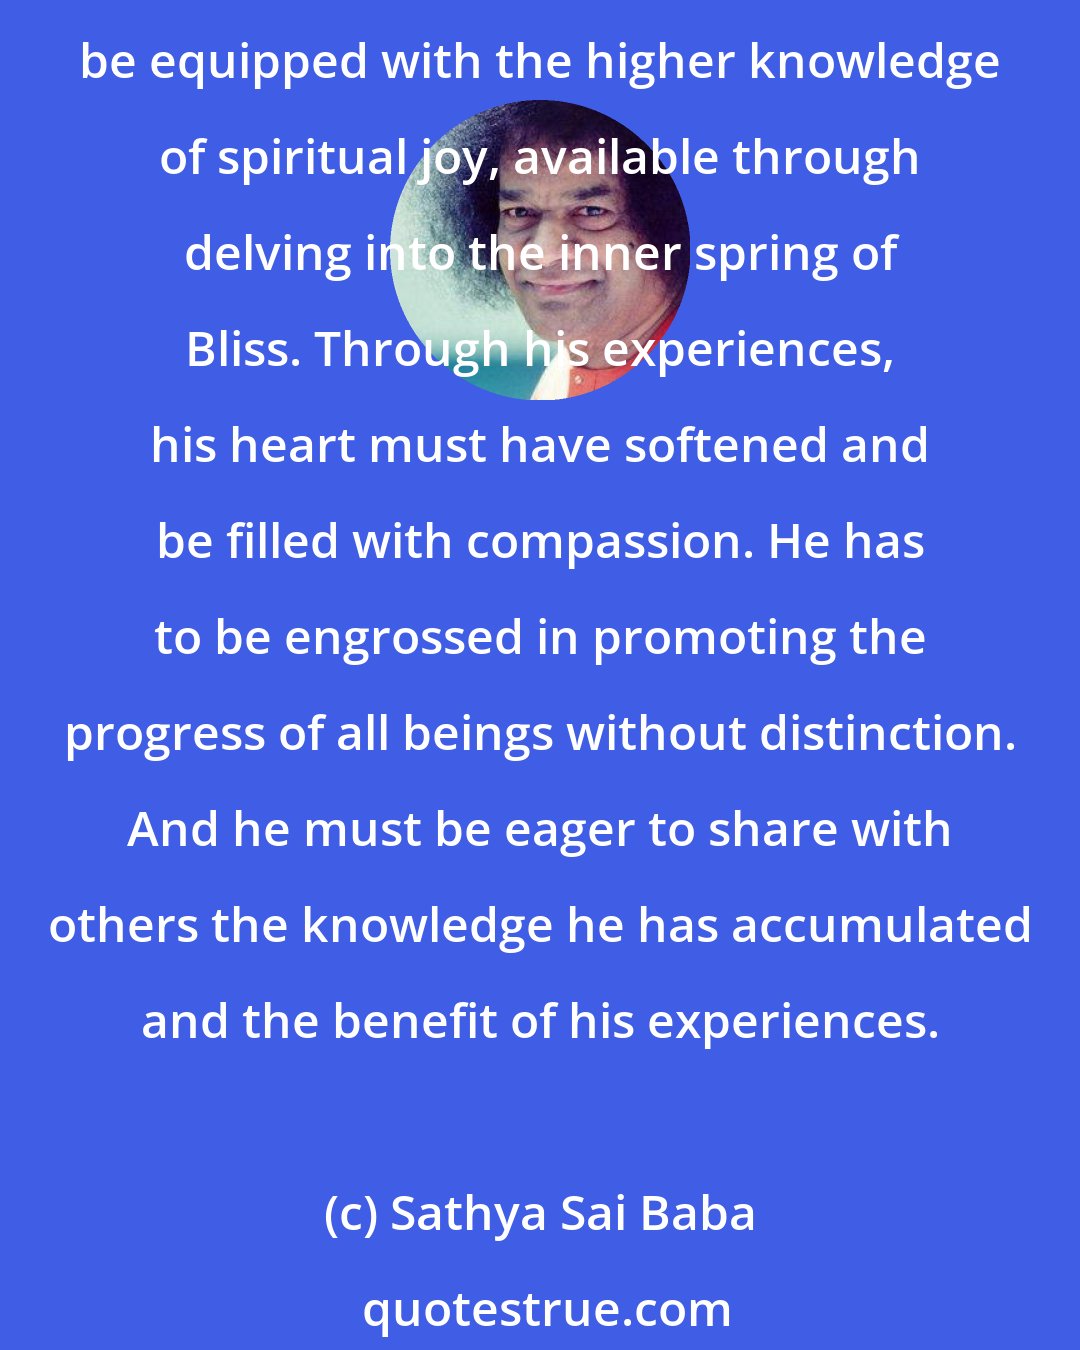 Sathya Sai Baba: Old age is the fourth stage. By the time one reaches this stage of his journey, he must have discovered that the joys available in this world are trivial and fleeting. He must be equipped with the higher knowledge of spiritual joy, available through delving into the inner spring of Bliss. Through his experiences, his heart must have softened and be filled with compassion. He has to be engrossed in promoting the progress of all beings without distinction. And he must be eager to share with others the knowledge he has accumulated and the benefit of his experiences.